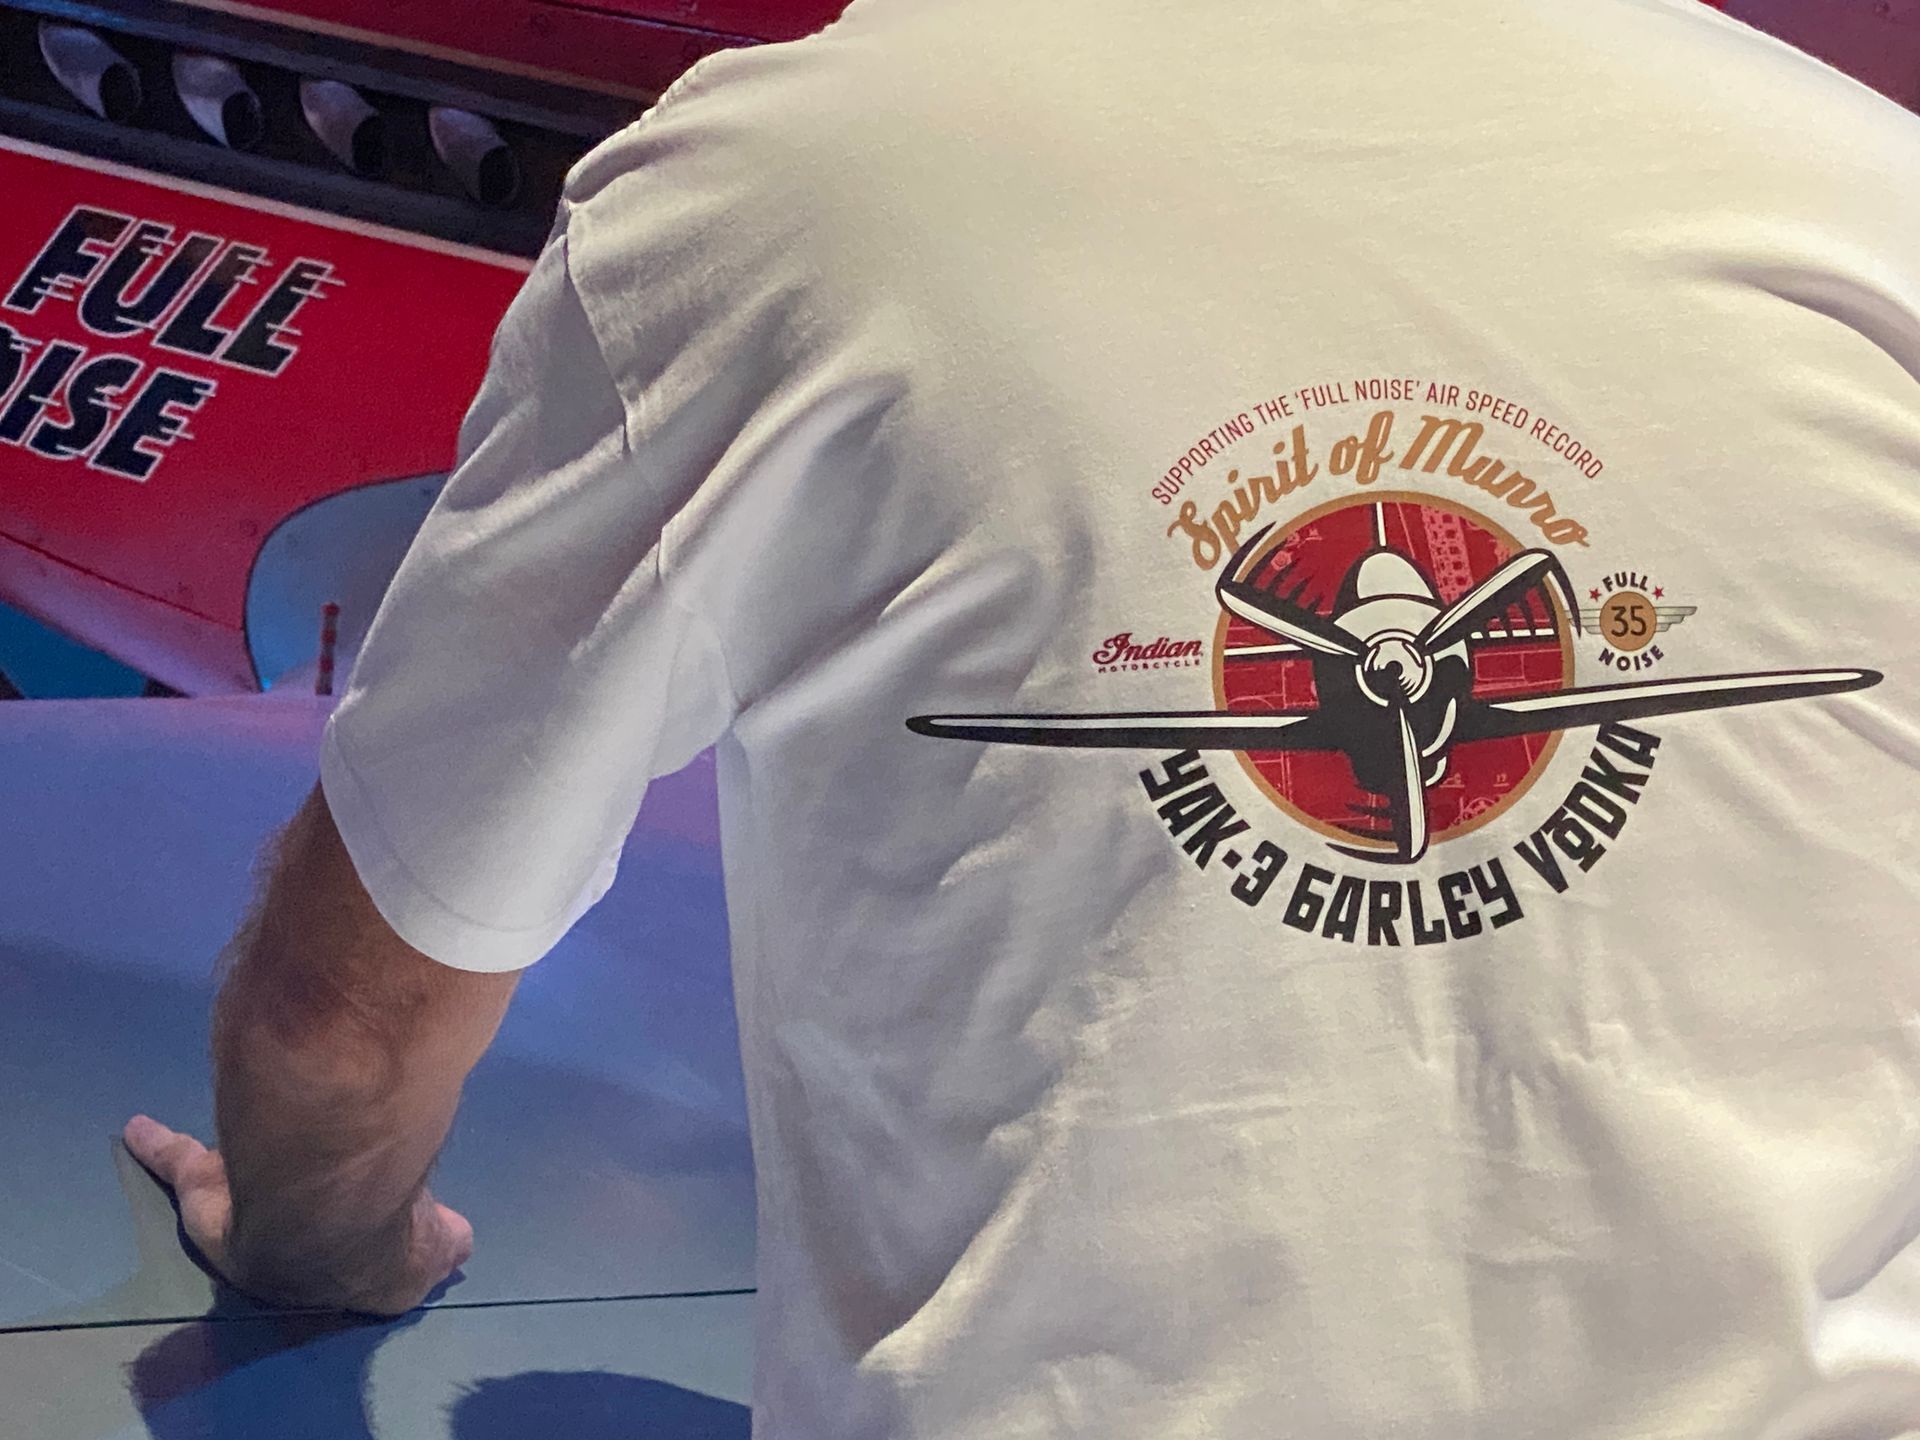 Fighter Flights crew wearing Full Noise t-shirts.